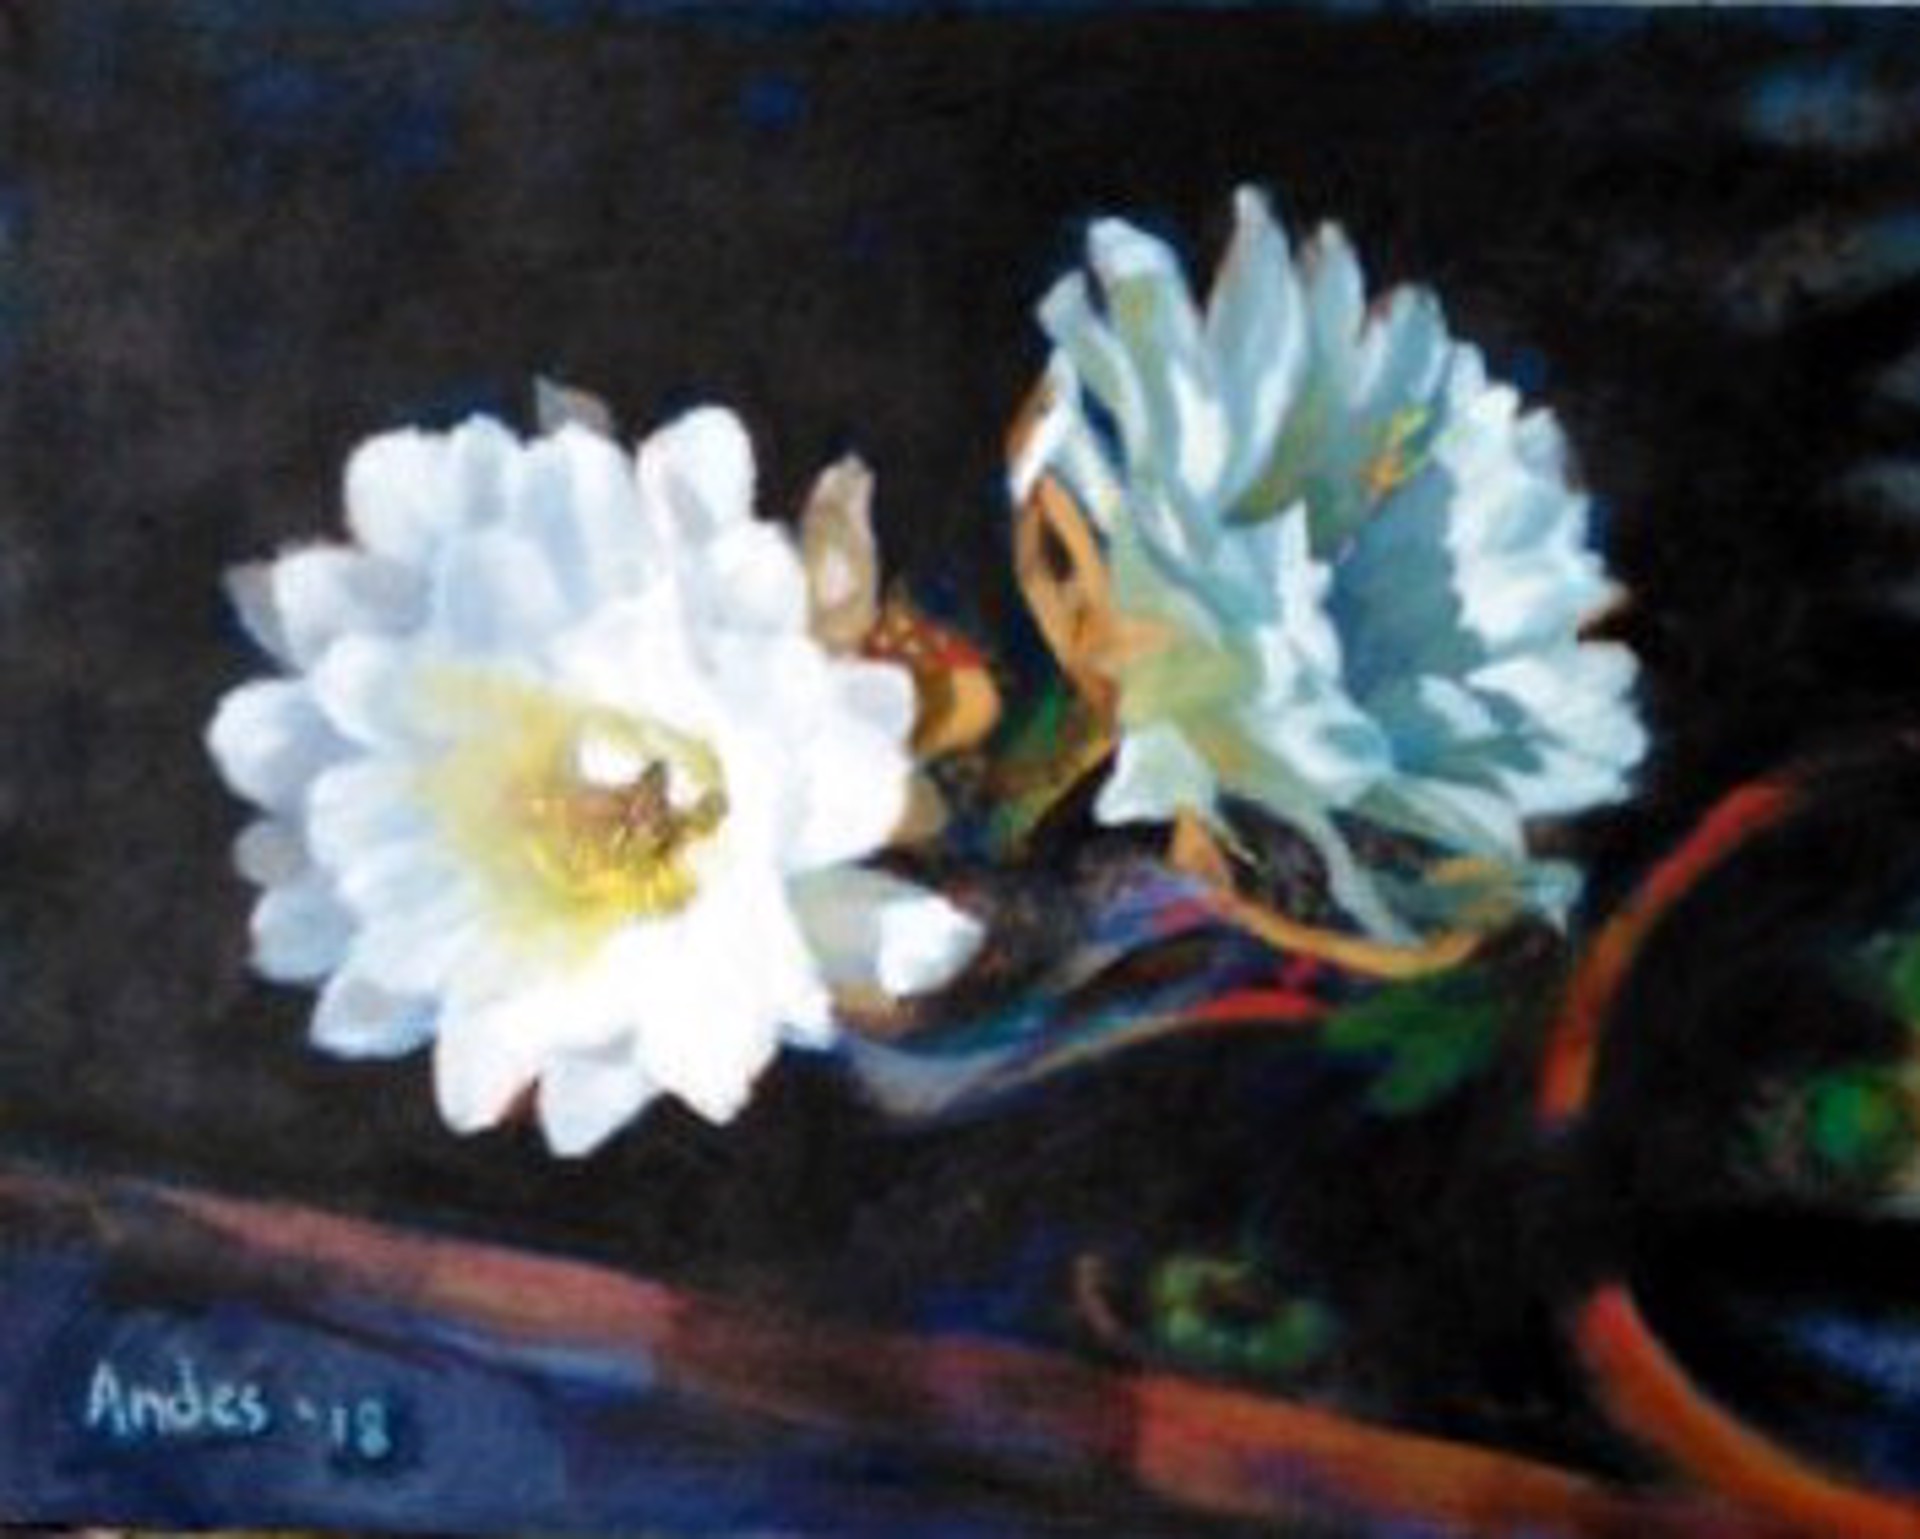 80 White Cactus Flower by Jacqueline Andes